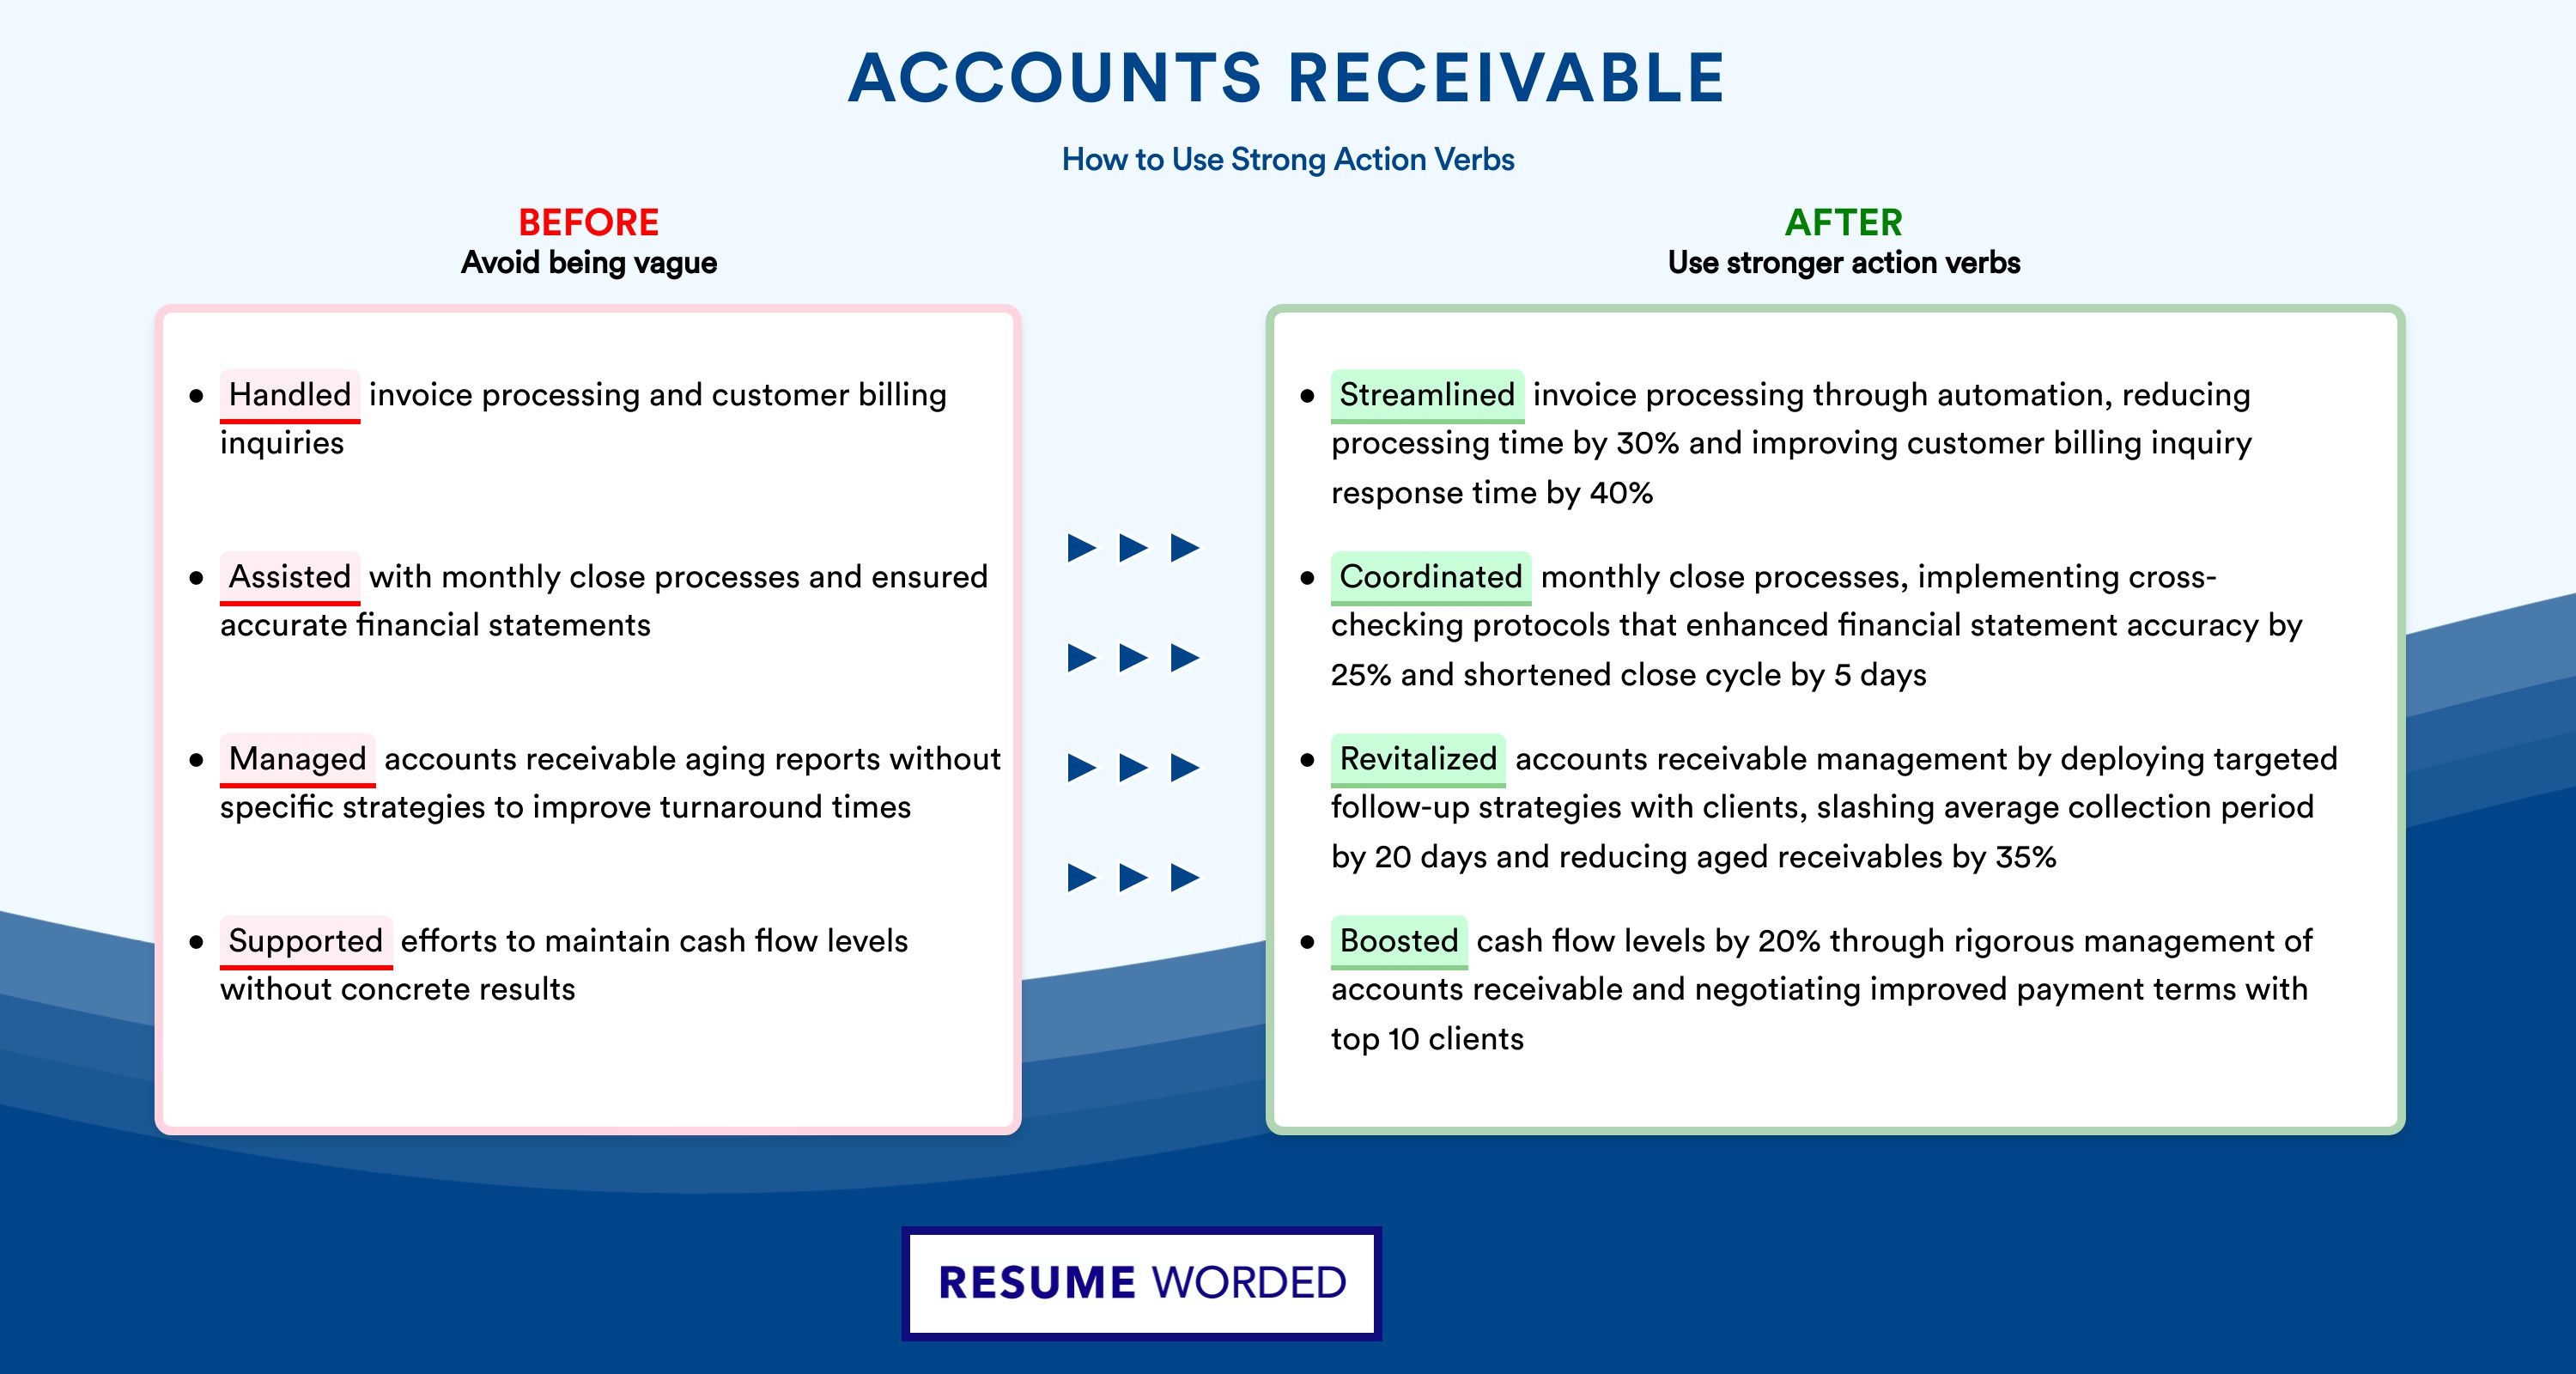 Action Verbs for Accounts Receivable